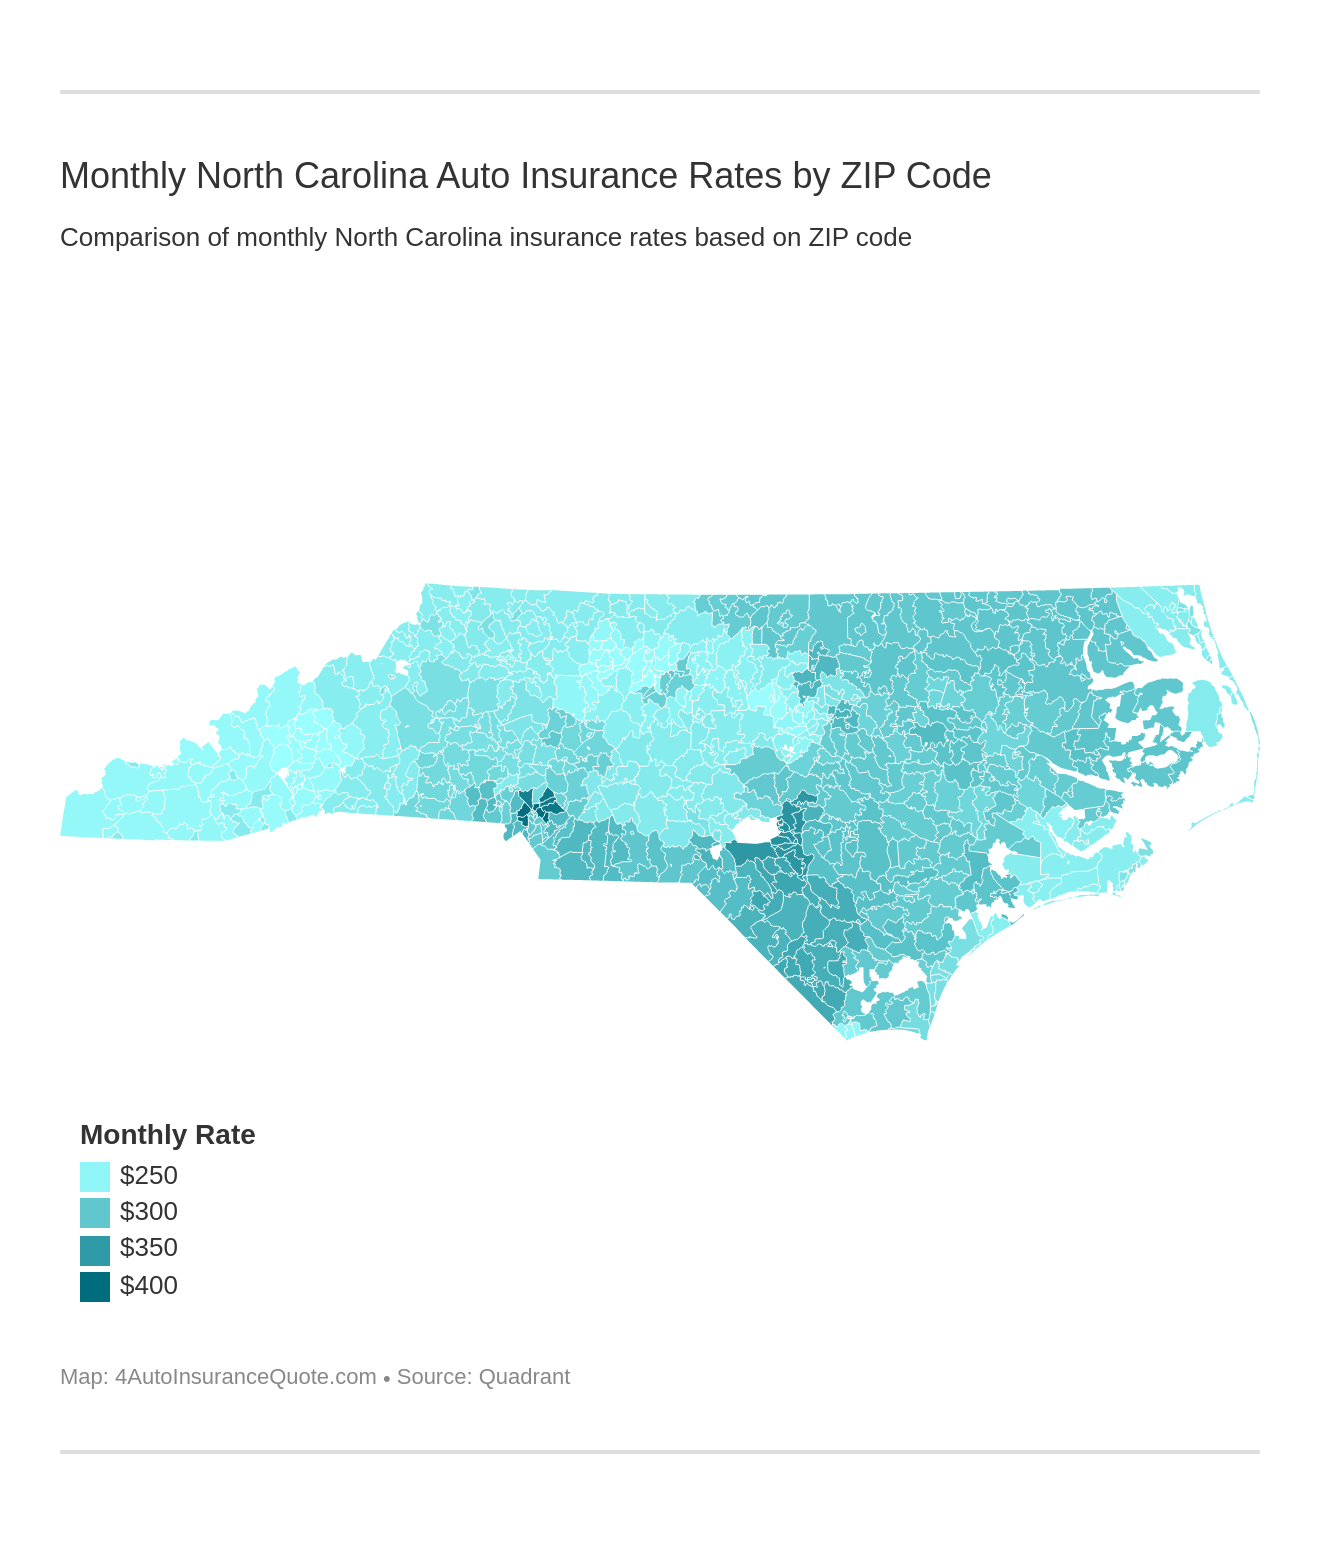 Monthly North Carolina Auto Insurance Rates by ZIP Code